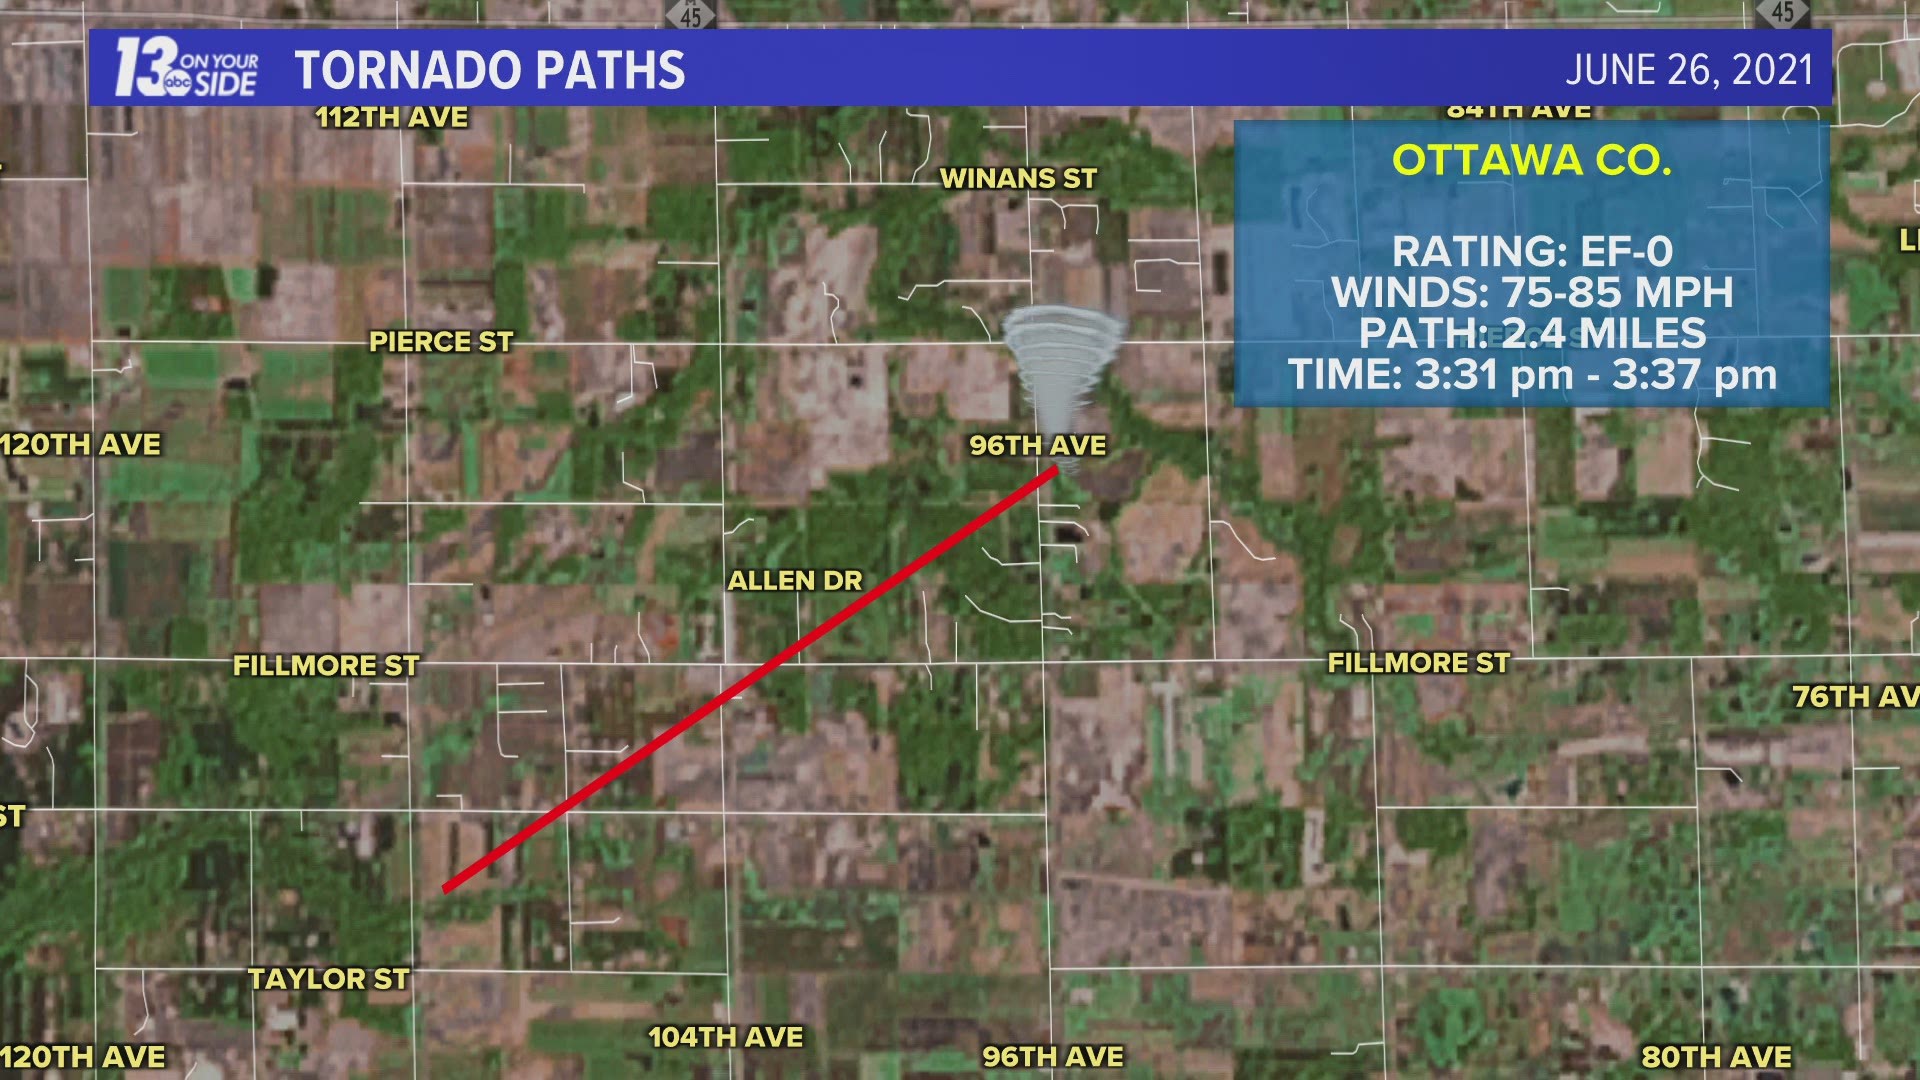 Another tornado from the June 26th severe storms was confirmed on Friday. This one went down in Ottawa County. Meteorologist Michael Behrens has details.